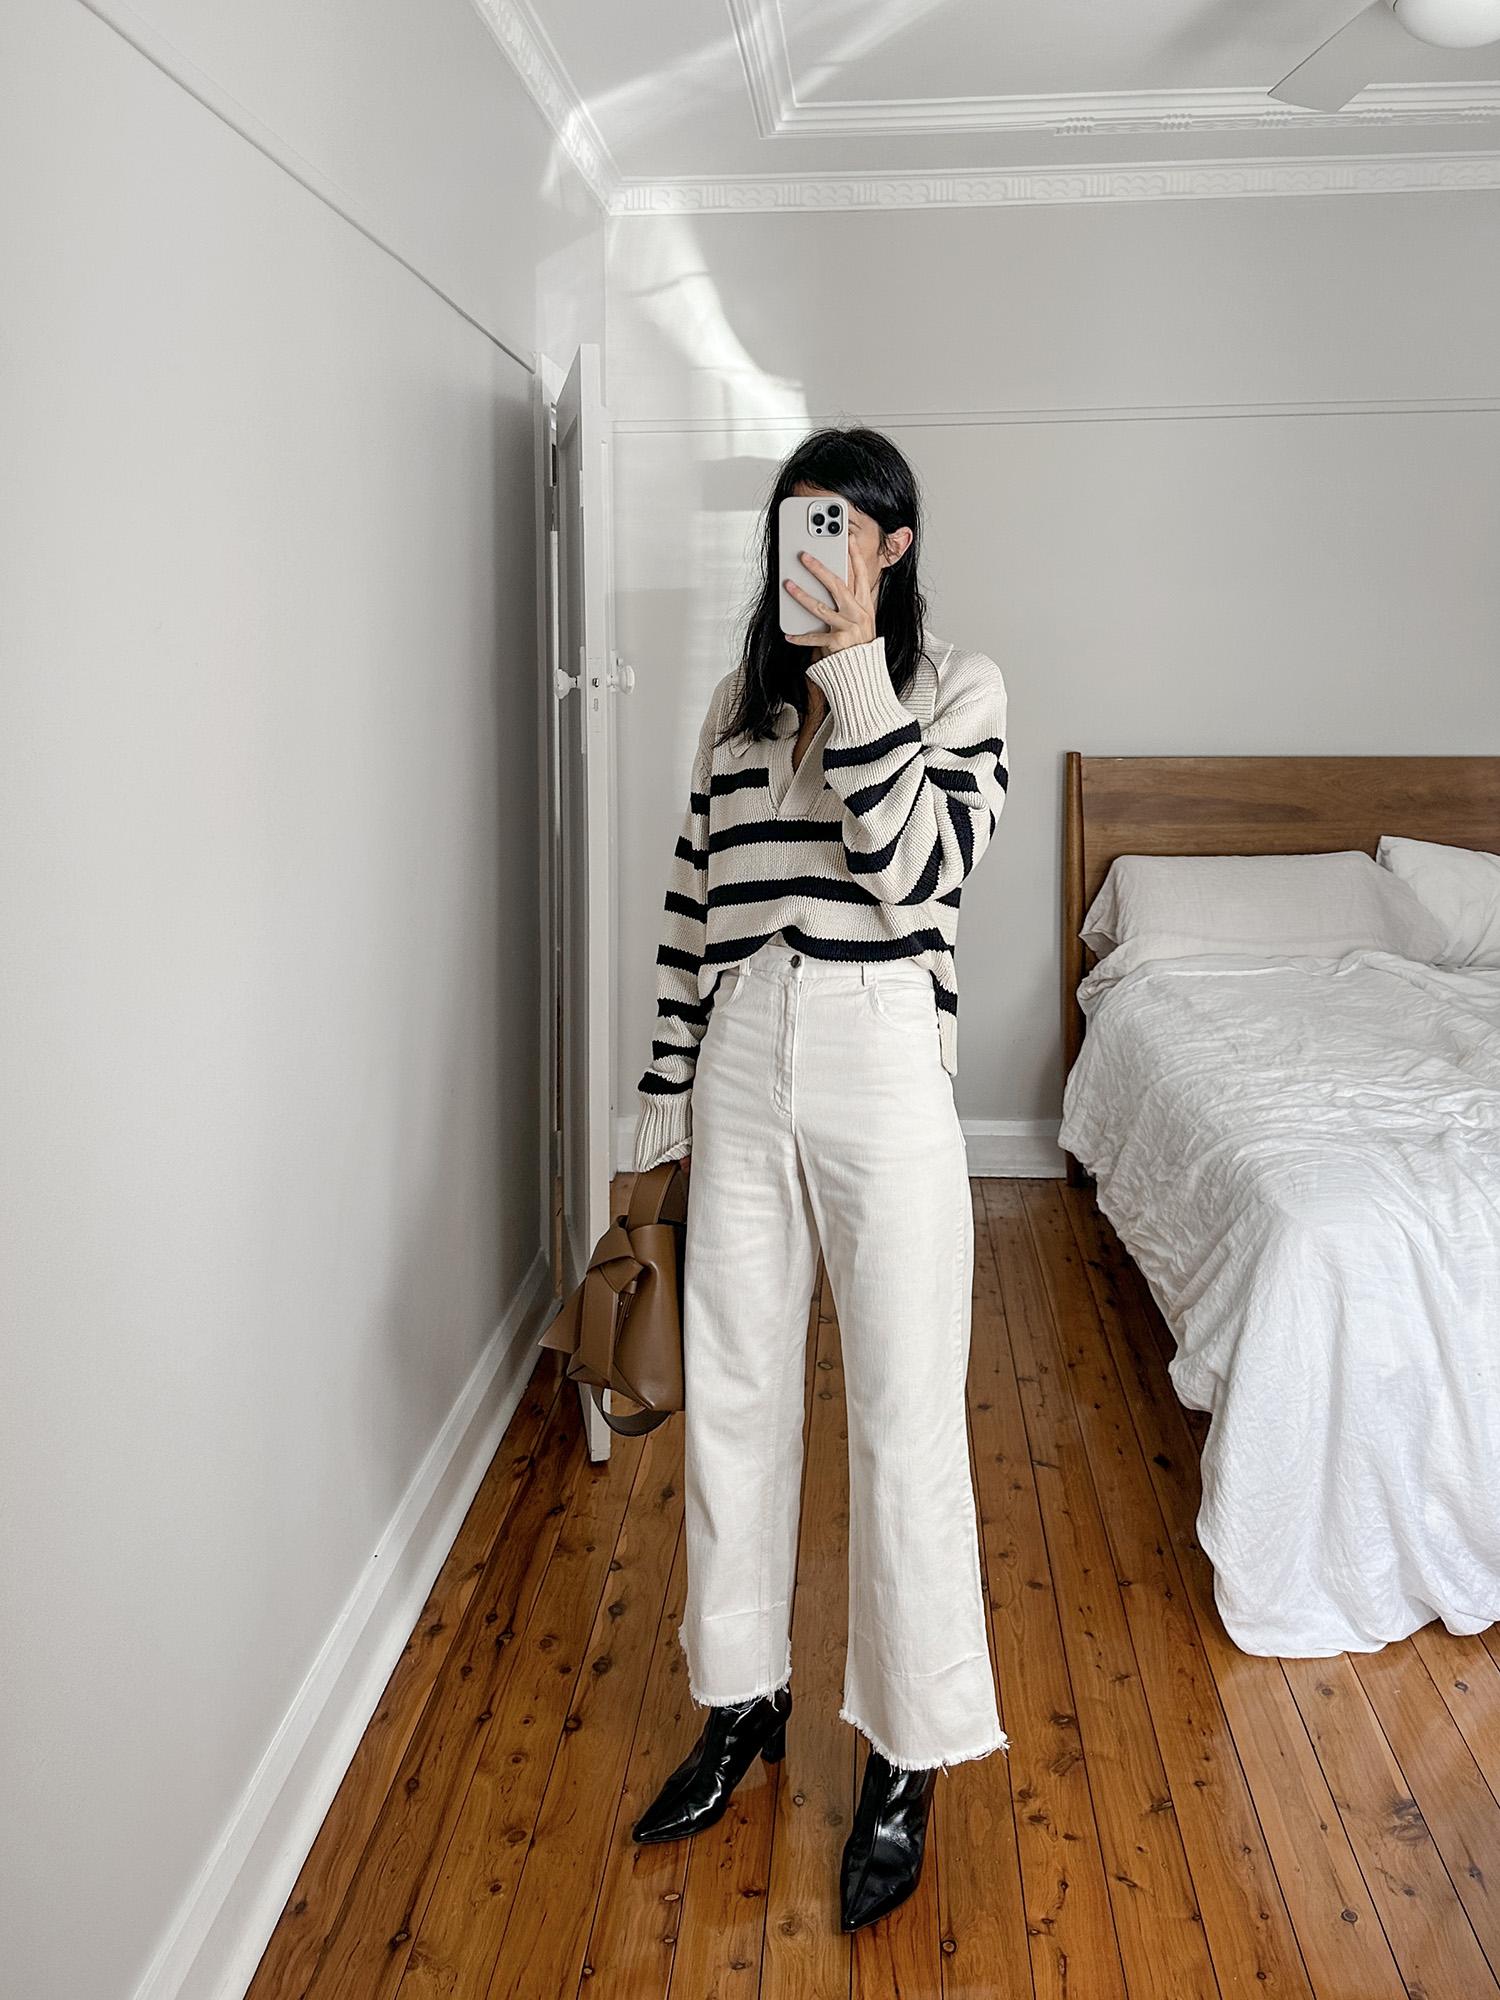 DISSH striped v neck knit with Rachel Comey jeans and Reike Nen boots